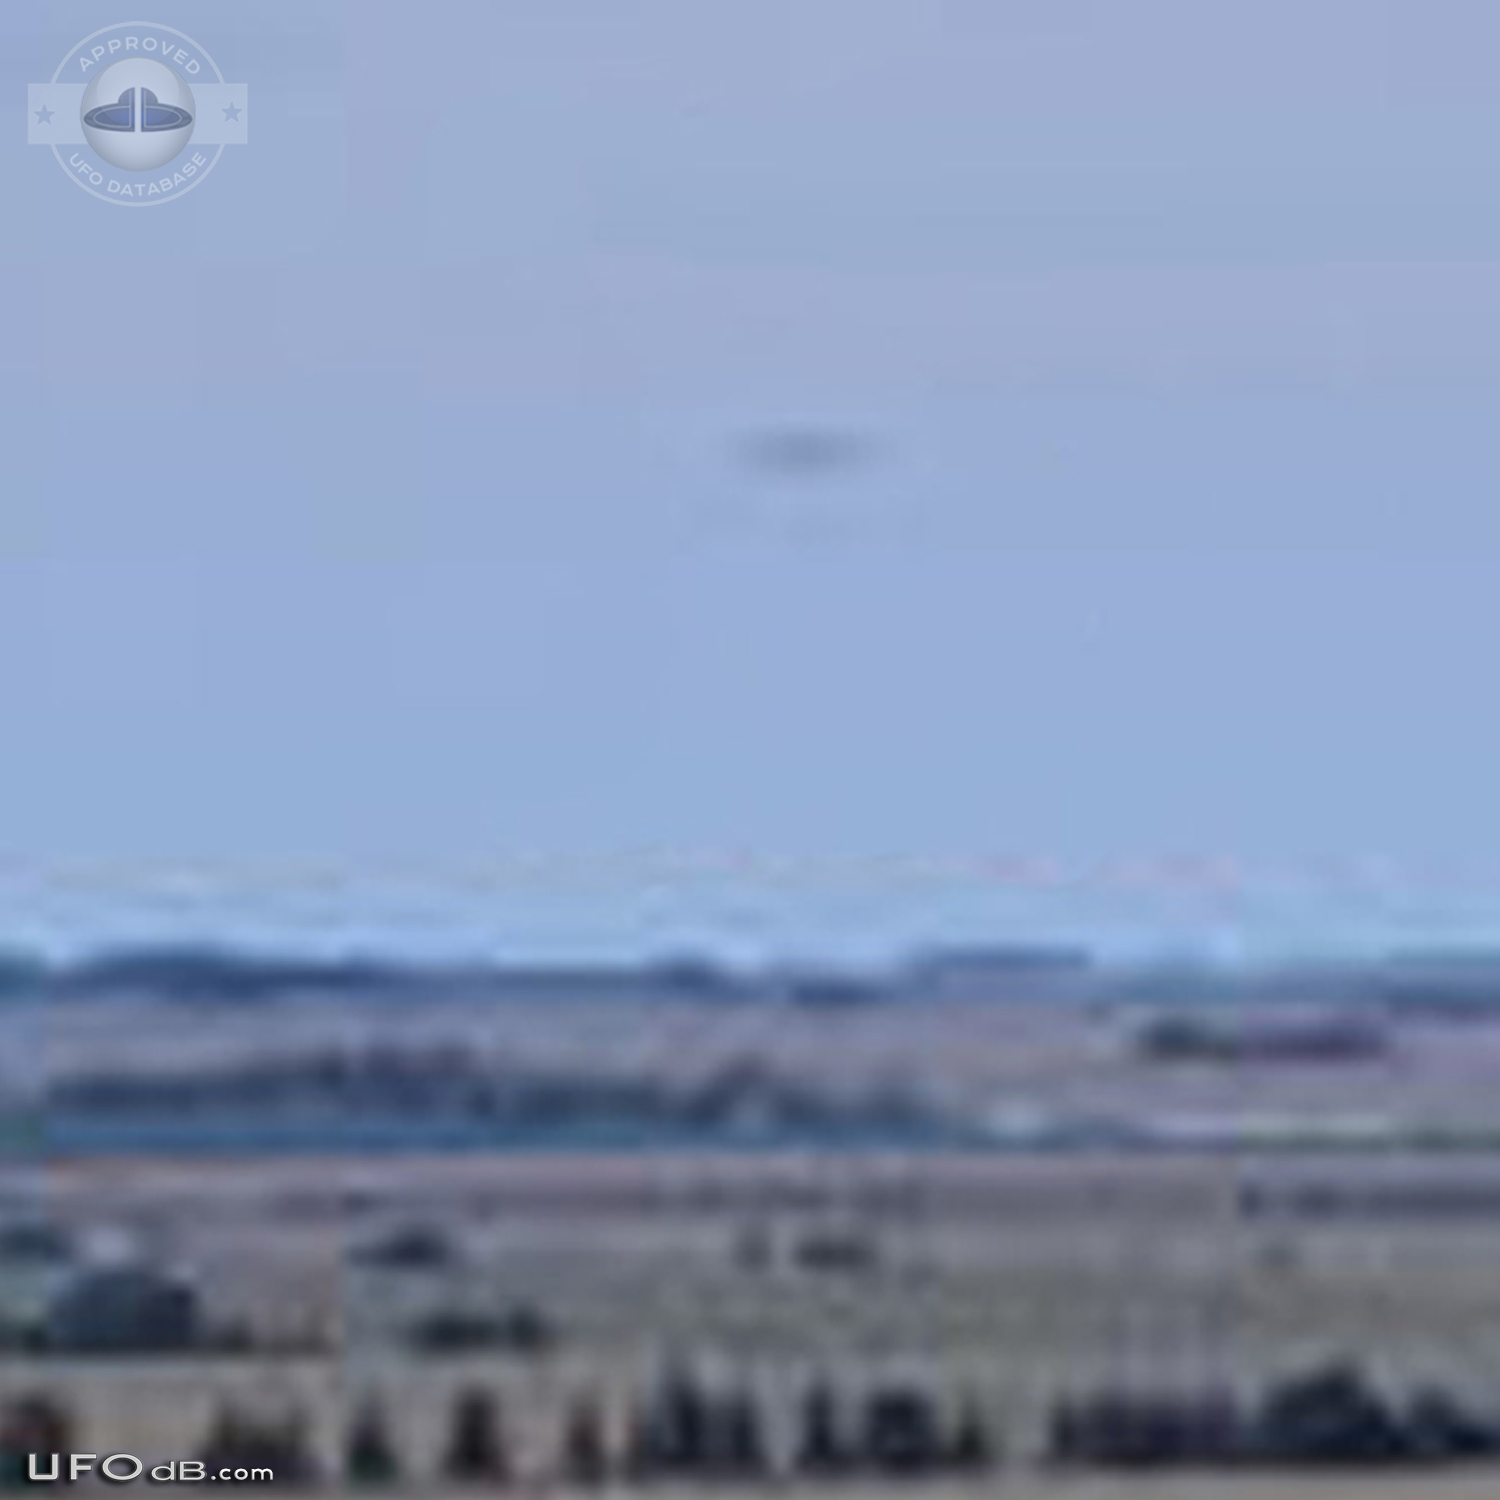 Large 70 meters wide UFO caught on picture - Cordoba, Argentina - 2009 UFO Picture #369-4